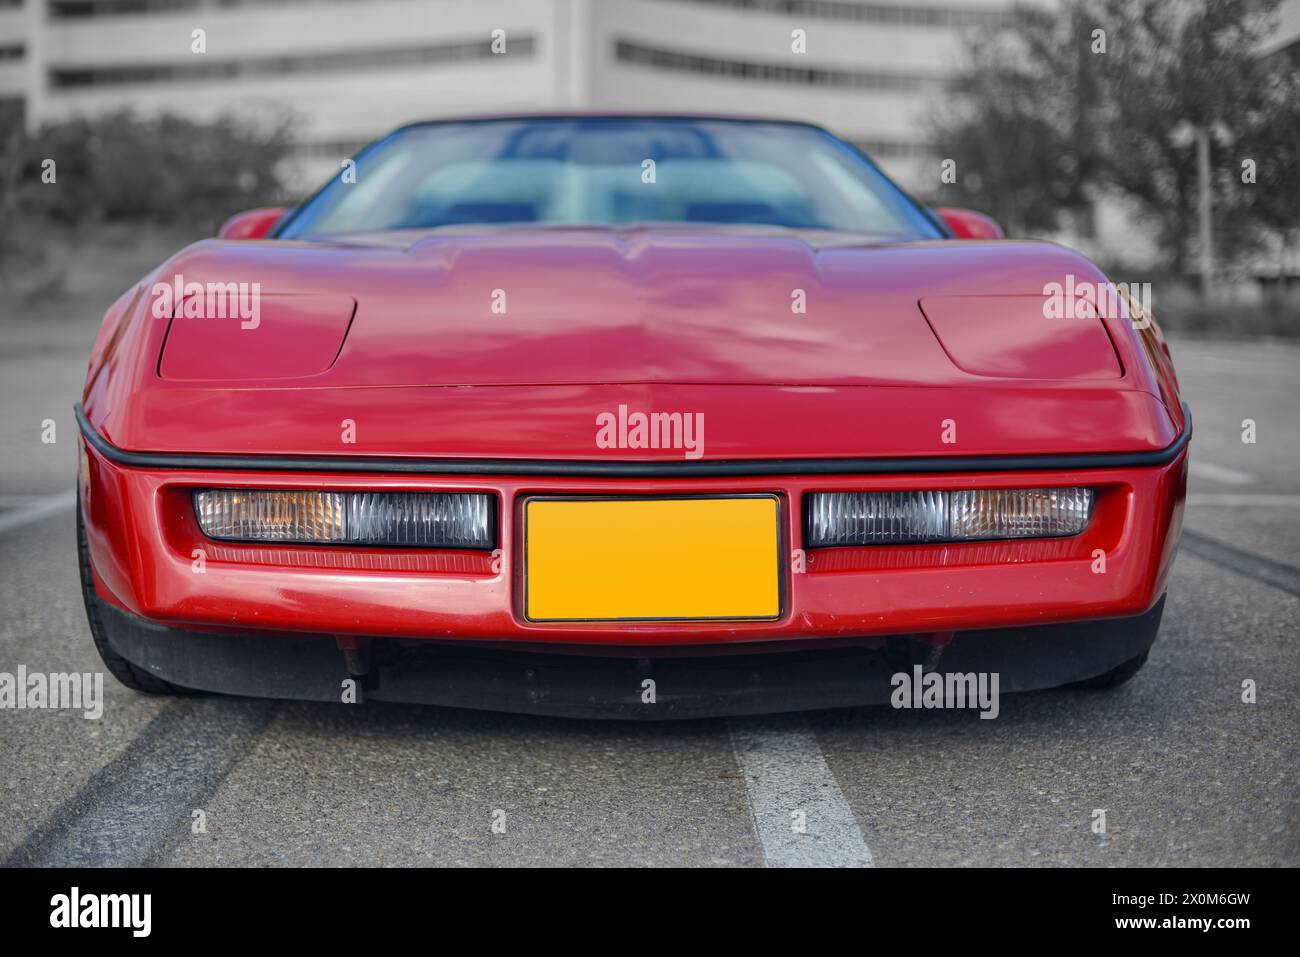 red American Muscle car from the 80s Stock Photo